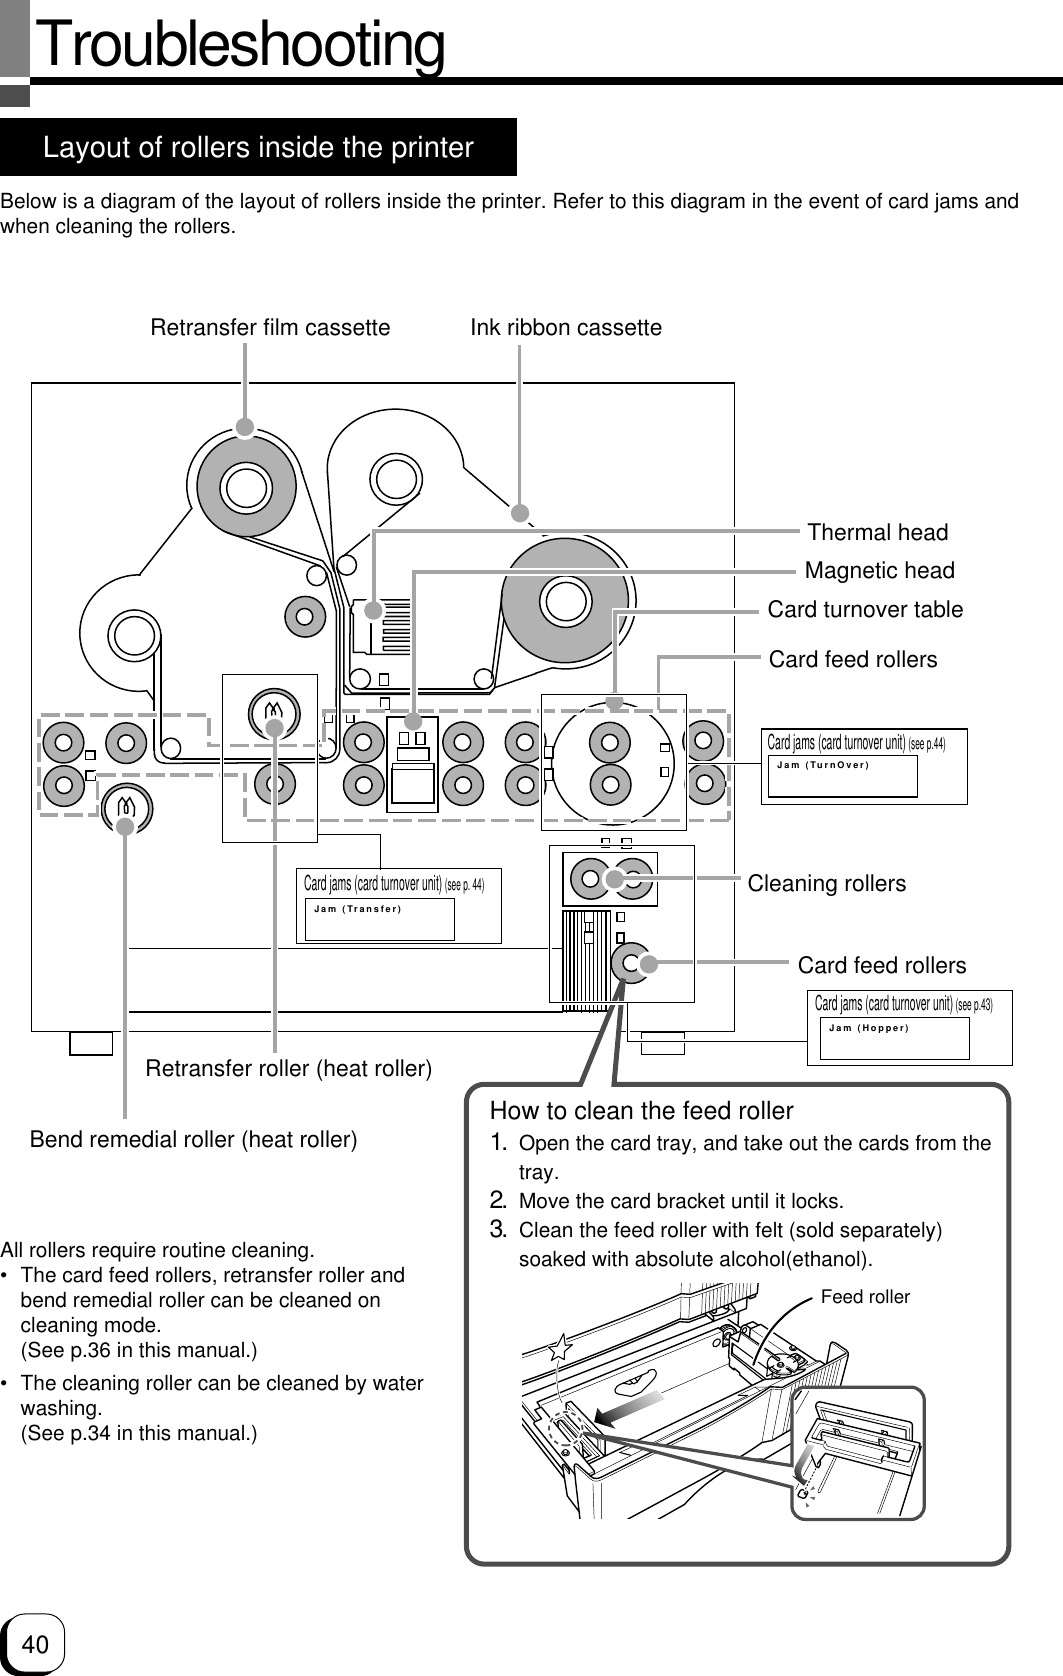 40Jam (TurnOver)Jam (Hopper)Jam (Transfer)TroubleshootingLayout of rollers inside the printerBelow is a diagram of the layout of rollers inside the printer. Refer to this diagram in the event of card jams andwhen cleaning the rollers.Retransfer film cassette Ink ribbon cassetteThermal headCard feed rollersCard jams (card turnover unit) (see p.44)Card jams (card turnover unit) (see p.43)Card jams (card turnover unit) (see p. 44)Cleaning rollersCard feed rollersBend remedial roller (heat roller)Retransfer roller (heat roller)All rollers require routine cleaning.• The card feed rollers, retransfer roller andbend remedial roller can be cleaned oncleaning mode.(See p.36 in this manual.)• The cleaning roller can be cleaned by waterwashing.(See p.34 in this manual.)Magnetic headCard turnover tableHow to clean the feed roller1. Open the card tray, and take out the cards from thetray.2. Move the card bracket until it locks.3. Clean the feed roller with felt (sold separately)soaked with absolute alcohol(ethanol).Feed roller